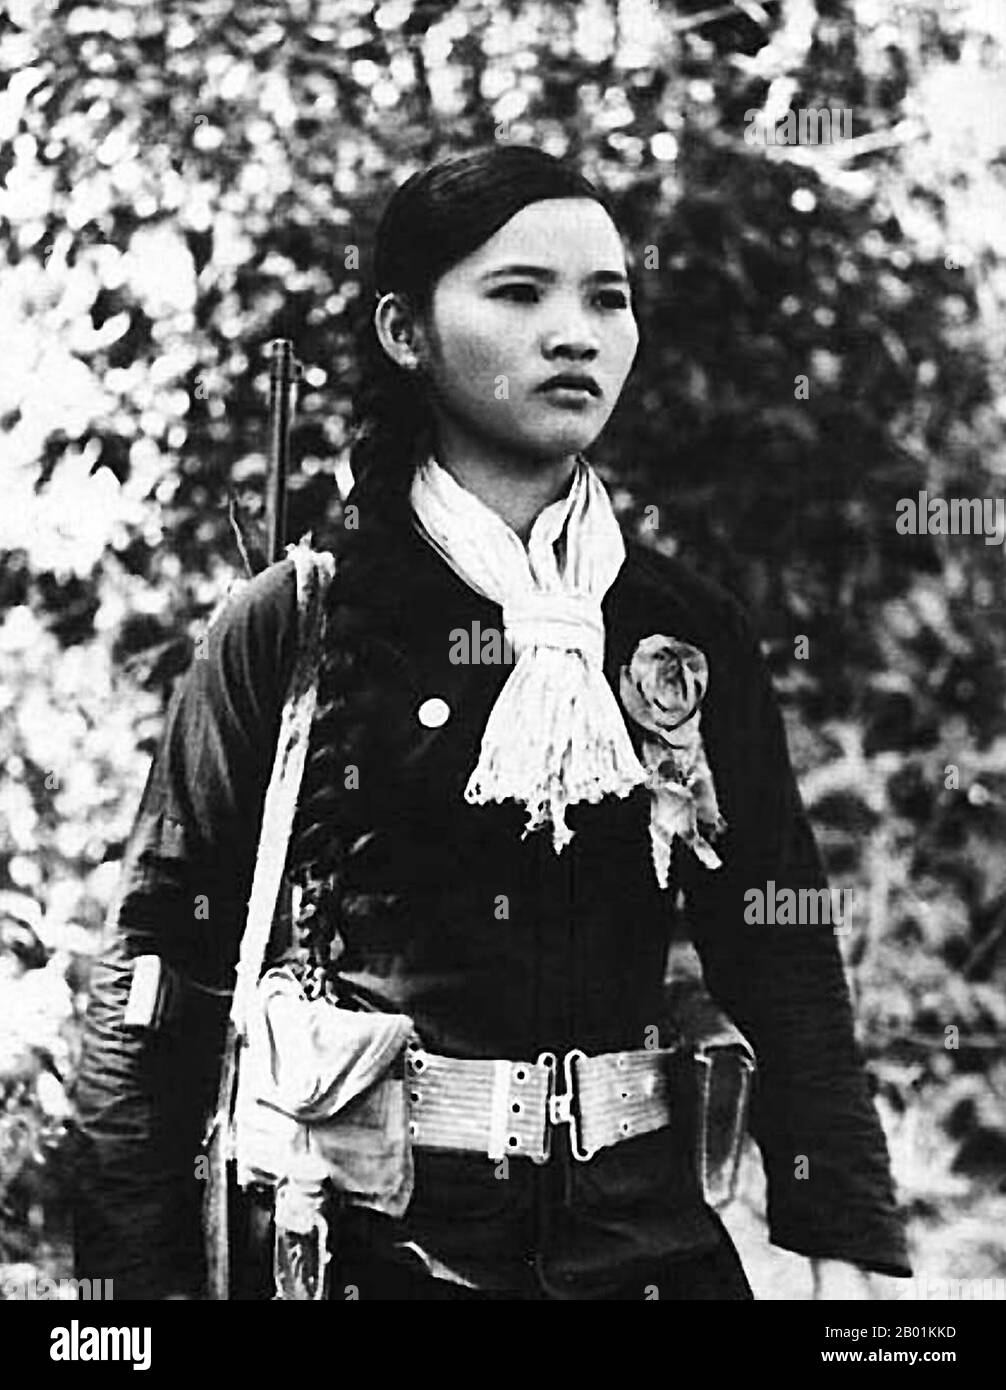 Vietnam: A female NLF (Viet Cong) guerrilla fighter, c. 1968.  The Second Indochina War, known in America as the Vietnam War, was a Cold War era military conflict that occurred in Vietnam, Laos, and Cambodia from 1 November 1955 to the fall of Saigon on 30 April 1975. This war followed the First Indochina War and was fought between North Vietnam, supported by its communist allies, and the government of South Vietnam, supported by the U.S. and other anti-communist nations.  The U.S. government viewed involvement in the war as a way to prevent a communist takeover of South Vietnam. Stock Photo